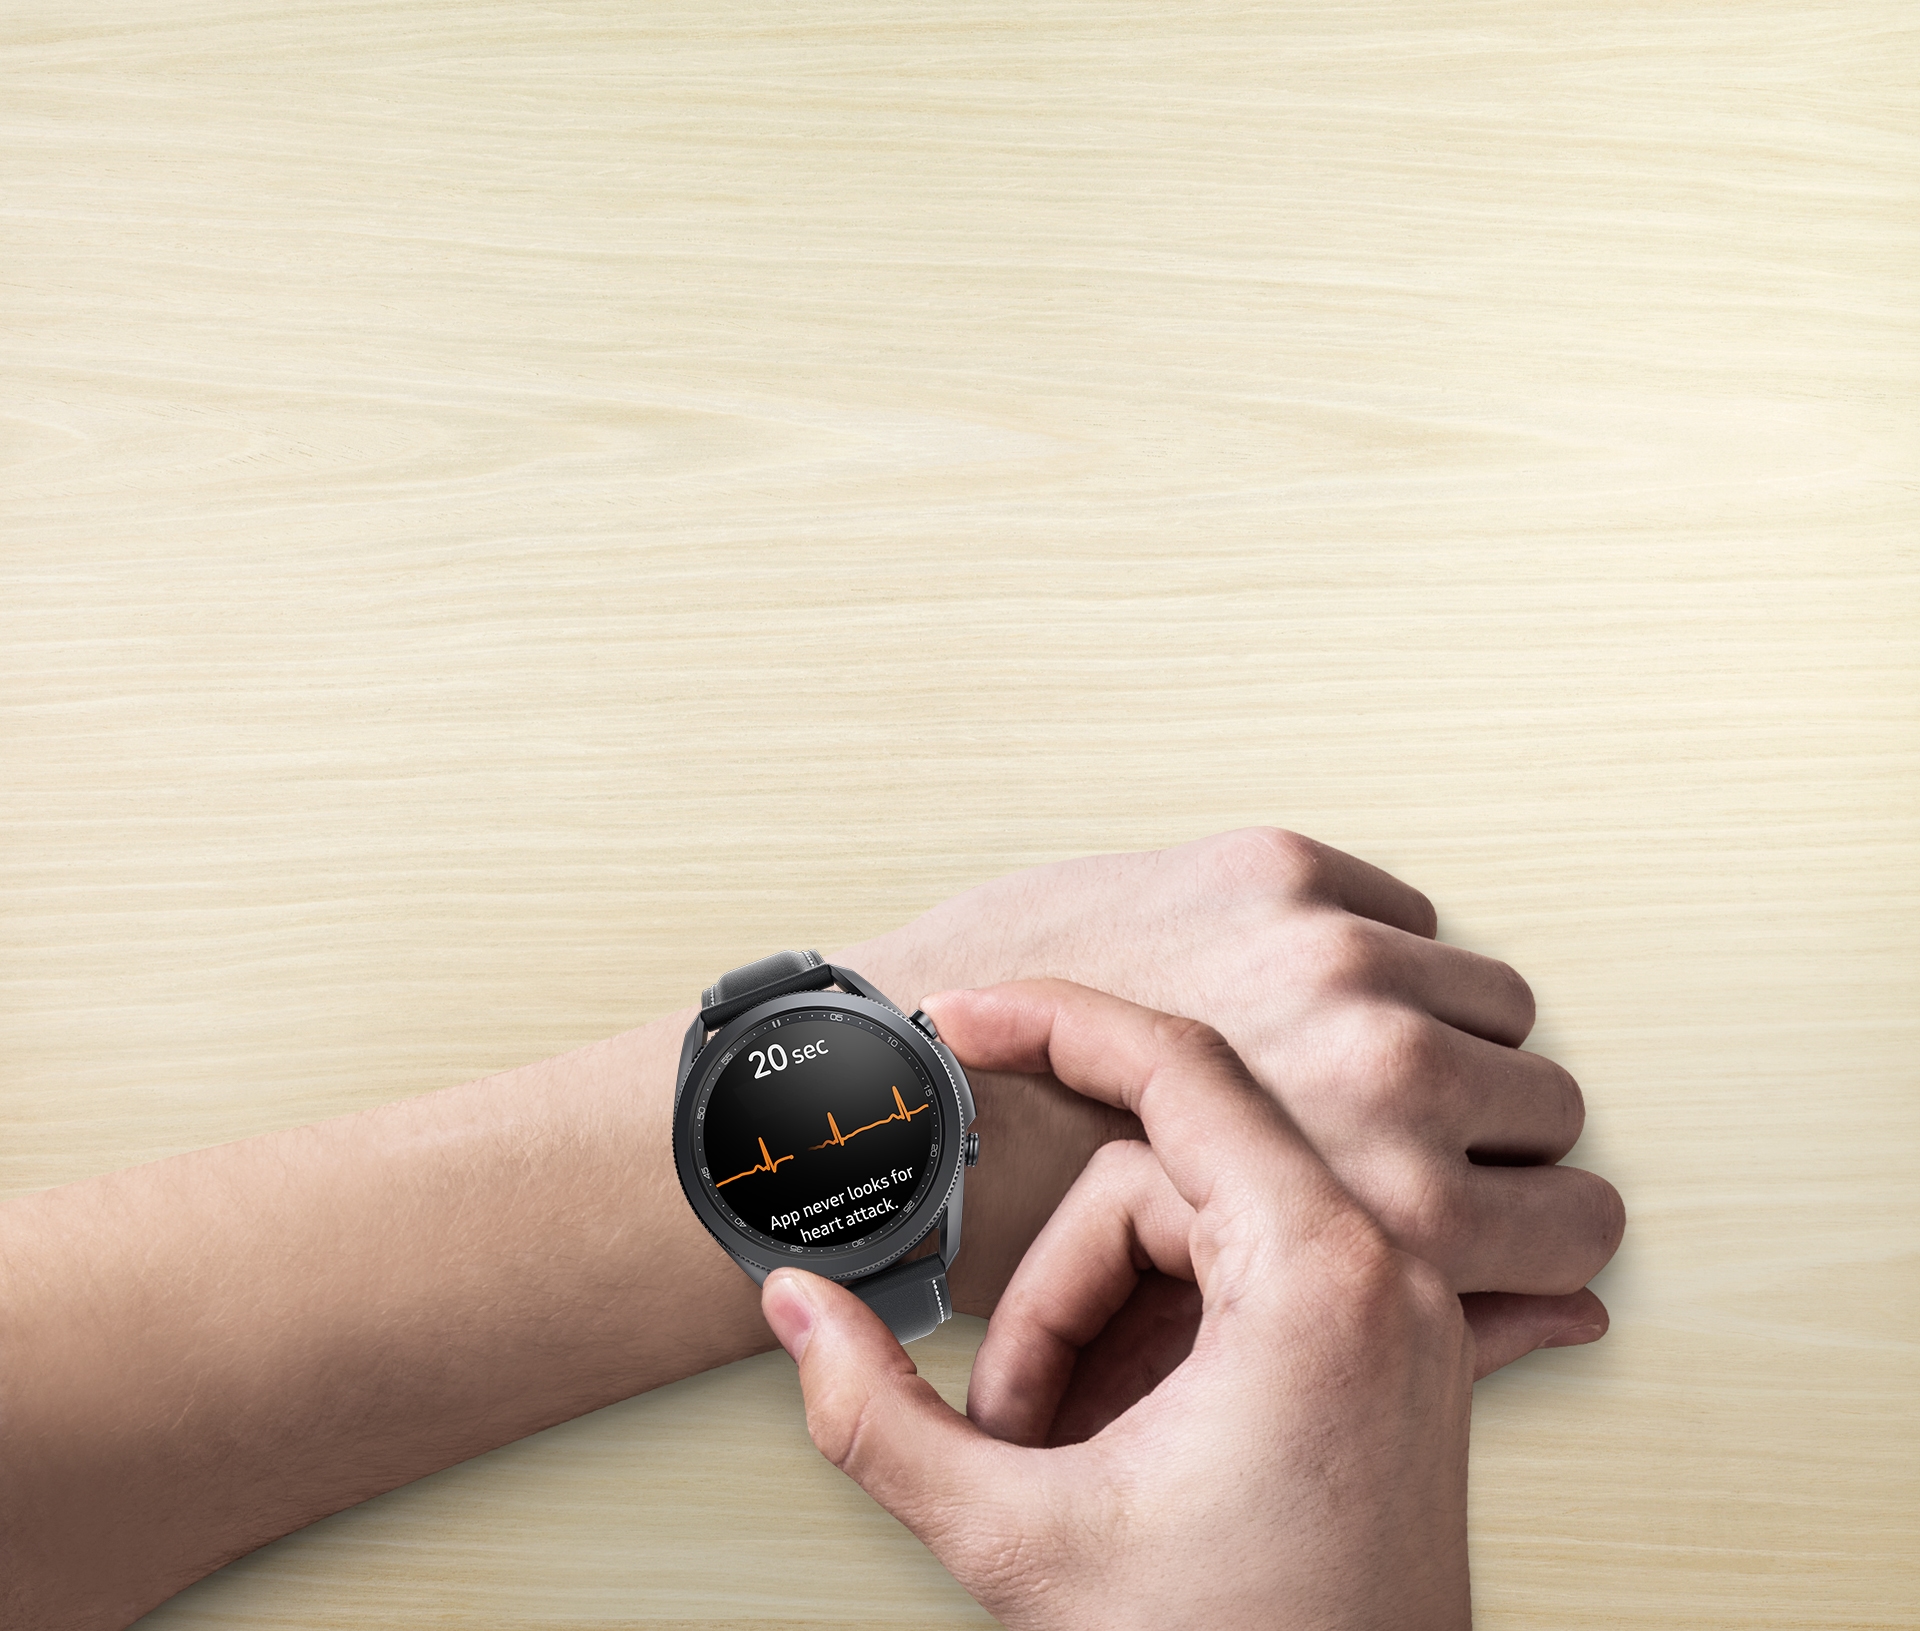 A view of an arm wearing the 45mm Galaxy Watch3 in Mystic Black. A hand presses a button on the side of the watch to measure ECG, with its GUI seen on the watch face.